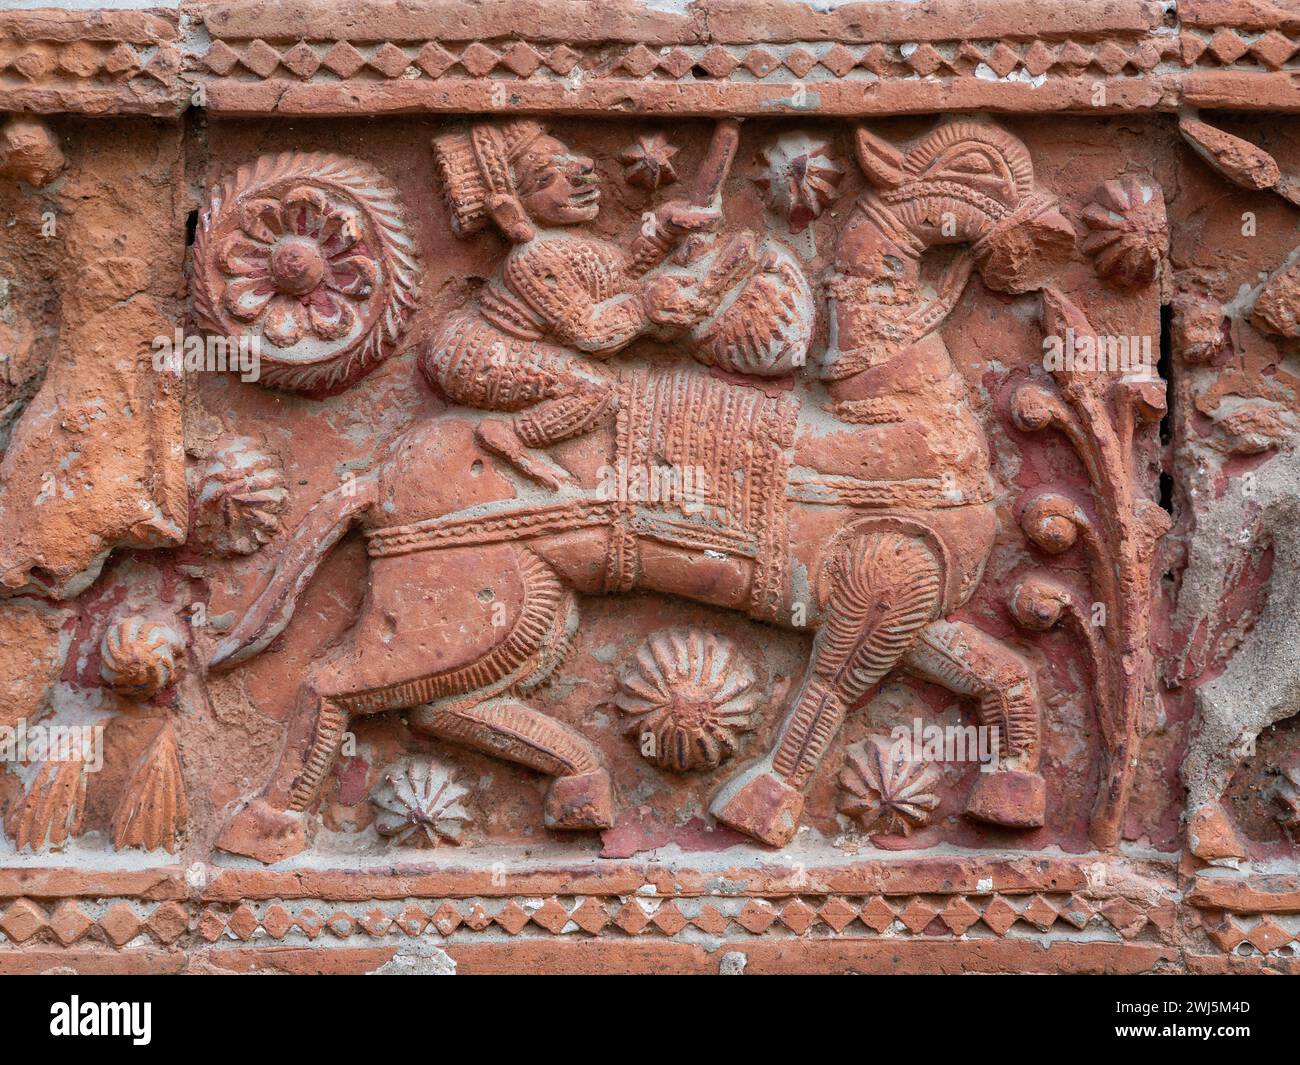 Closeup view of carved terracotta scene of man riding horse on ancient Govinda temple in Puthia religious complex, Rajshahi, Bangladesh Stock Photo